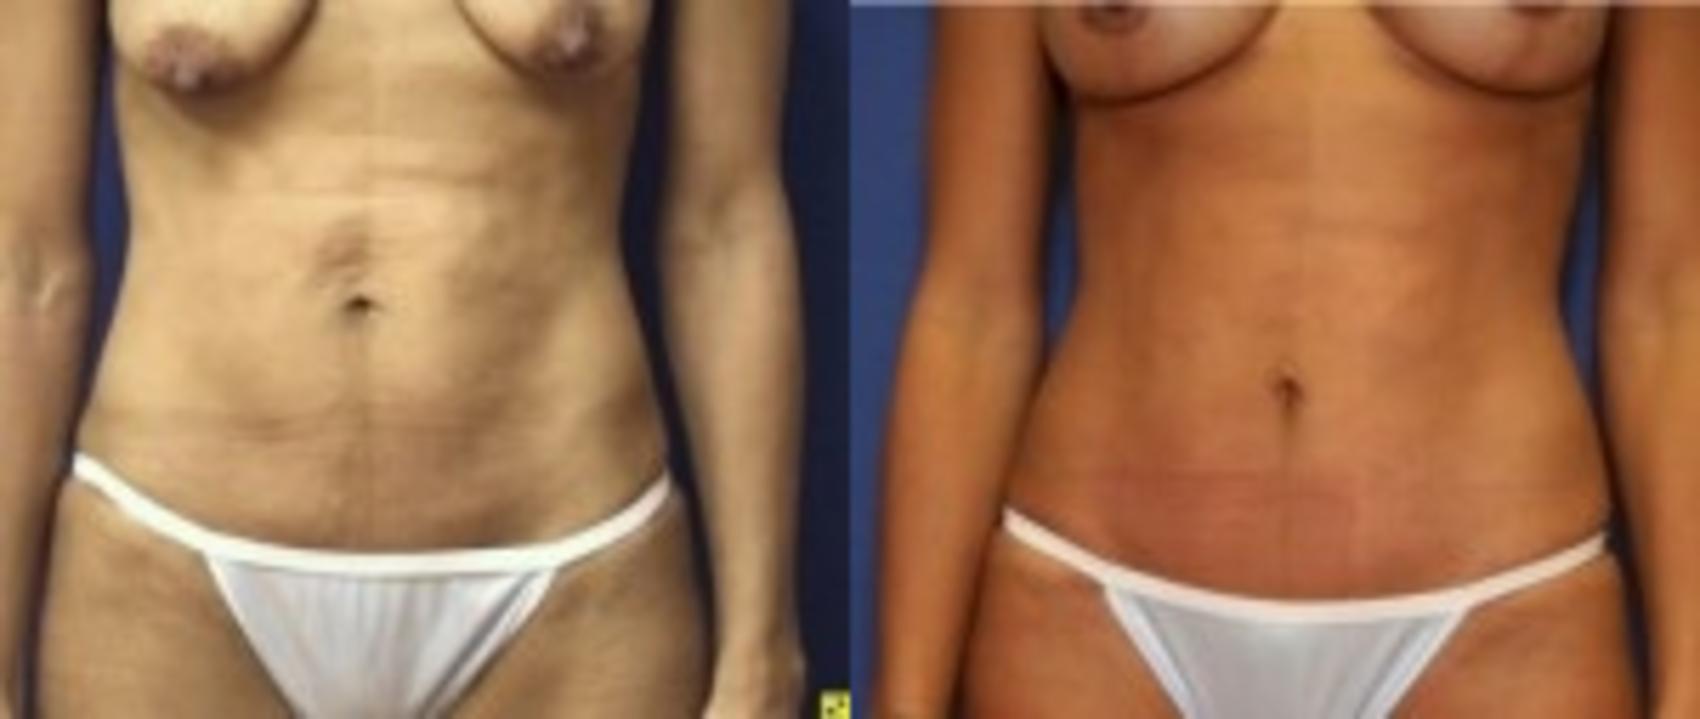 Before & After Tummy Tuck Case 248 Front View in Ypsilanti, MI